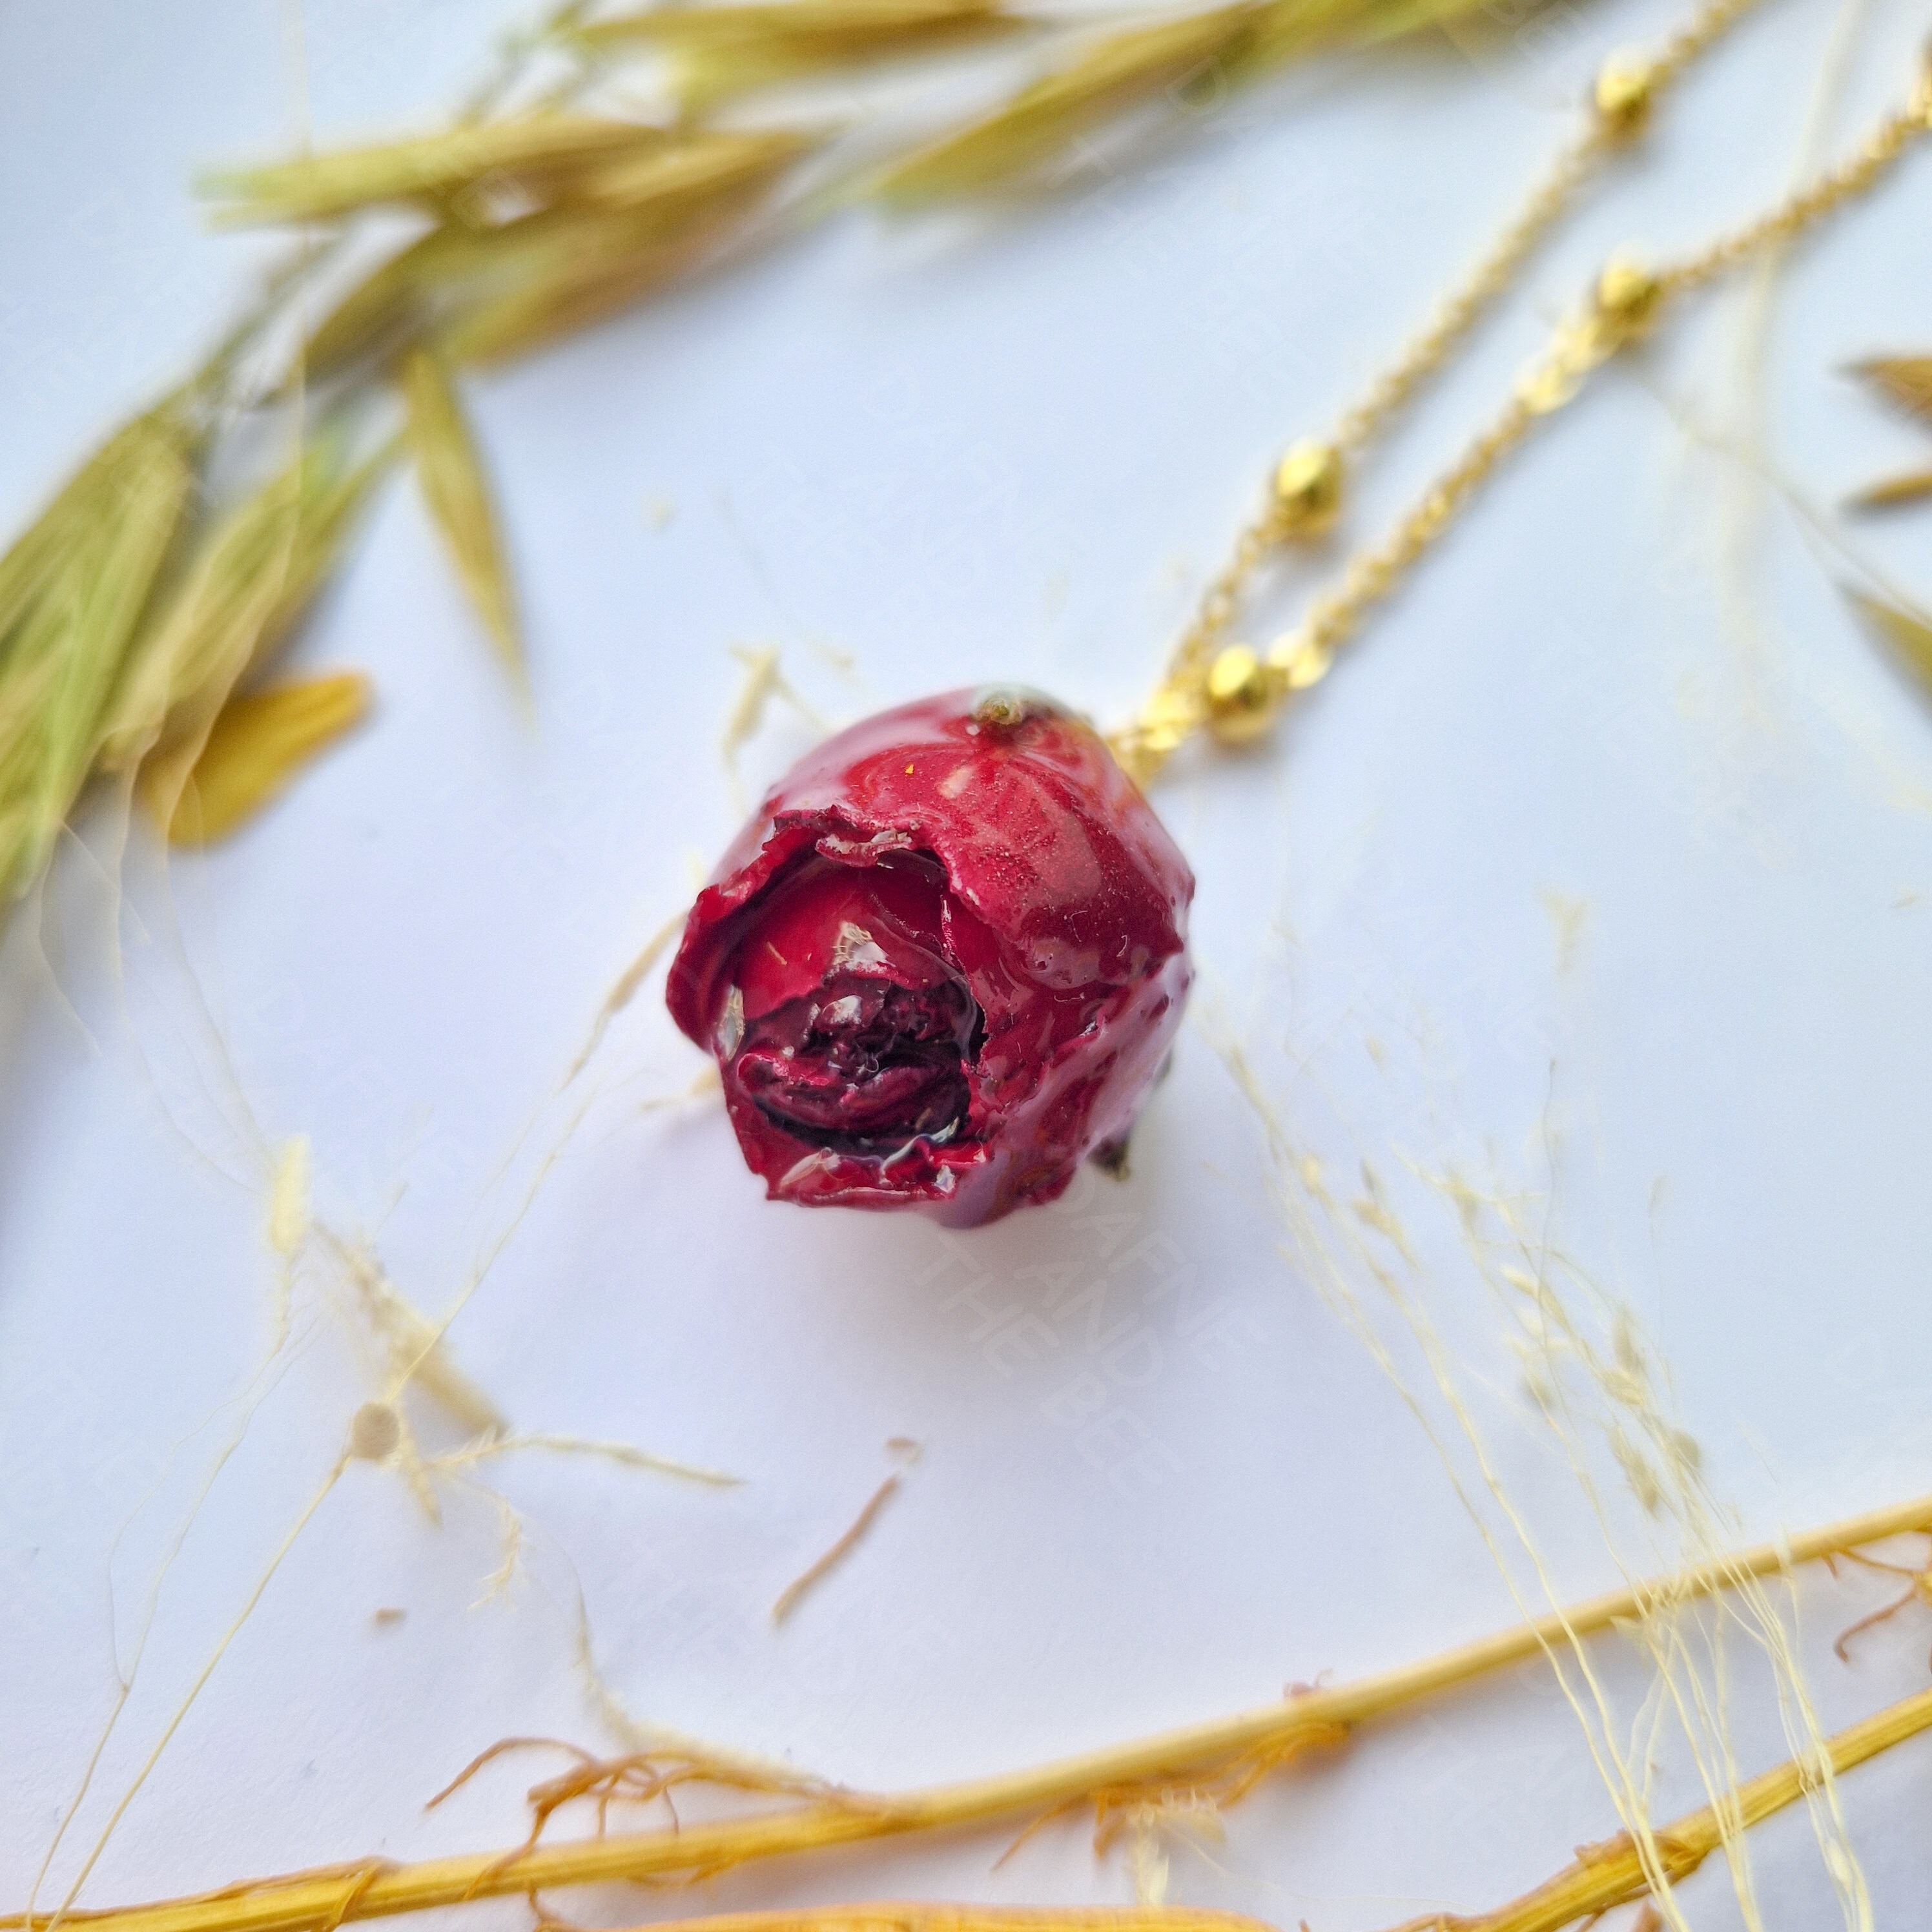 Real Pressed Flowers in Resin, Gold Pig Necklace in Light Pink 28 / Red